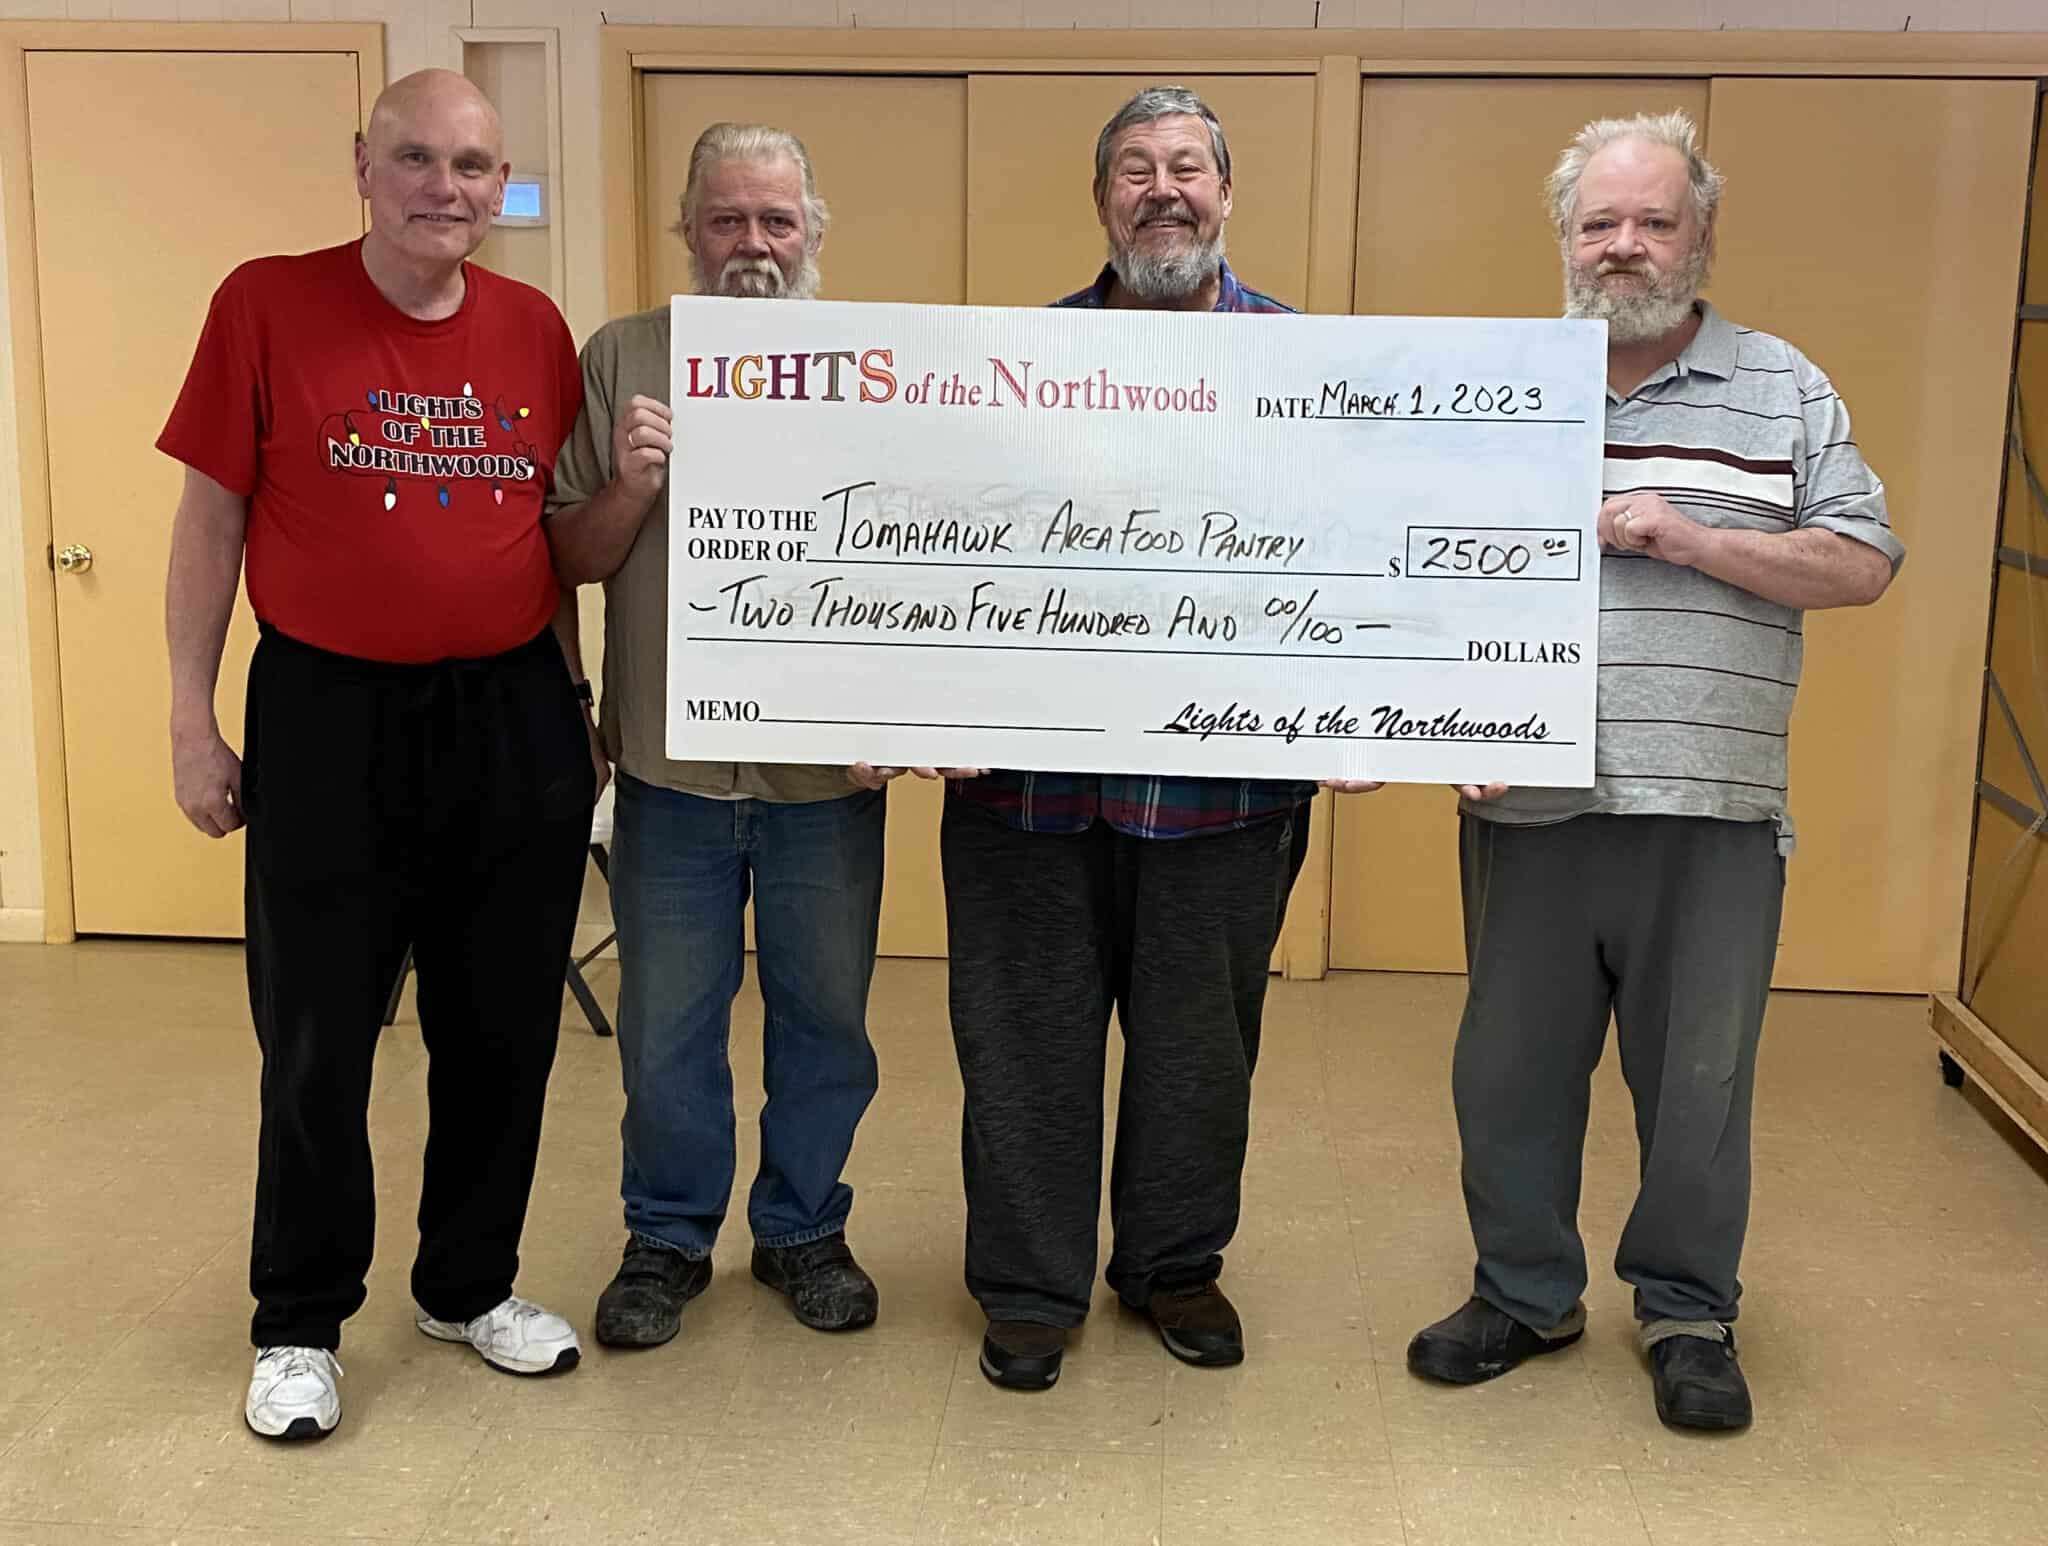 Lights of the Northwoods makes donation to Tomahawk Area Food Pantry